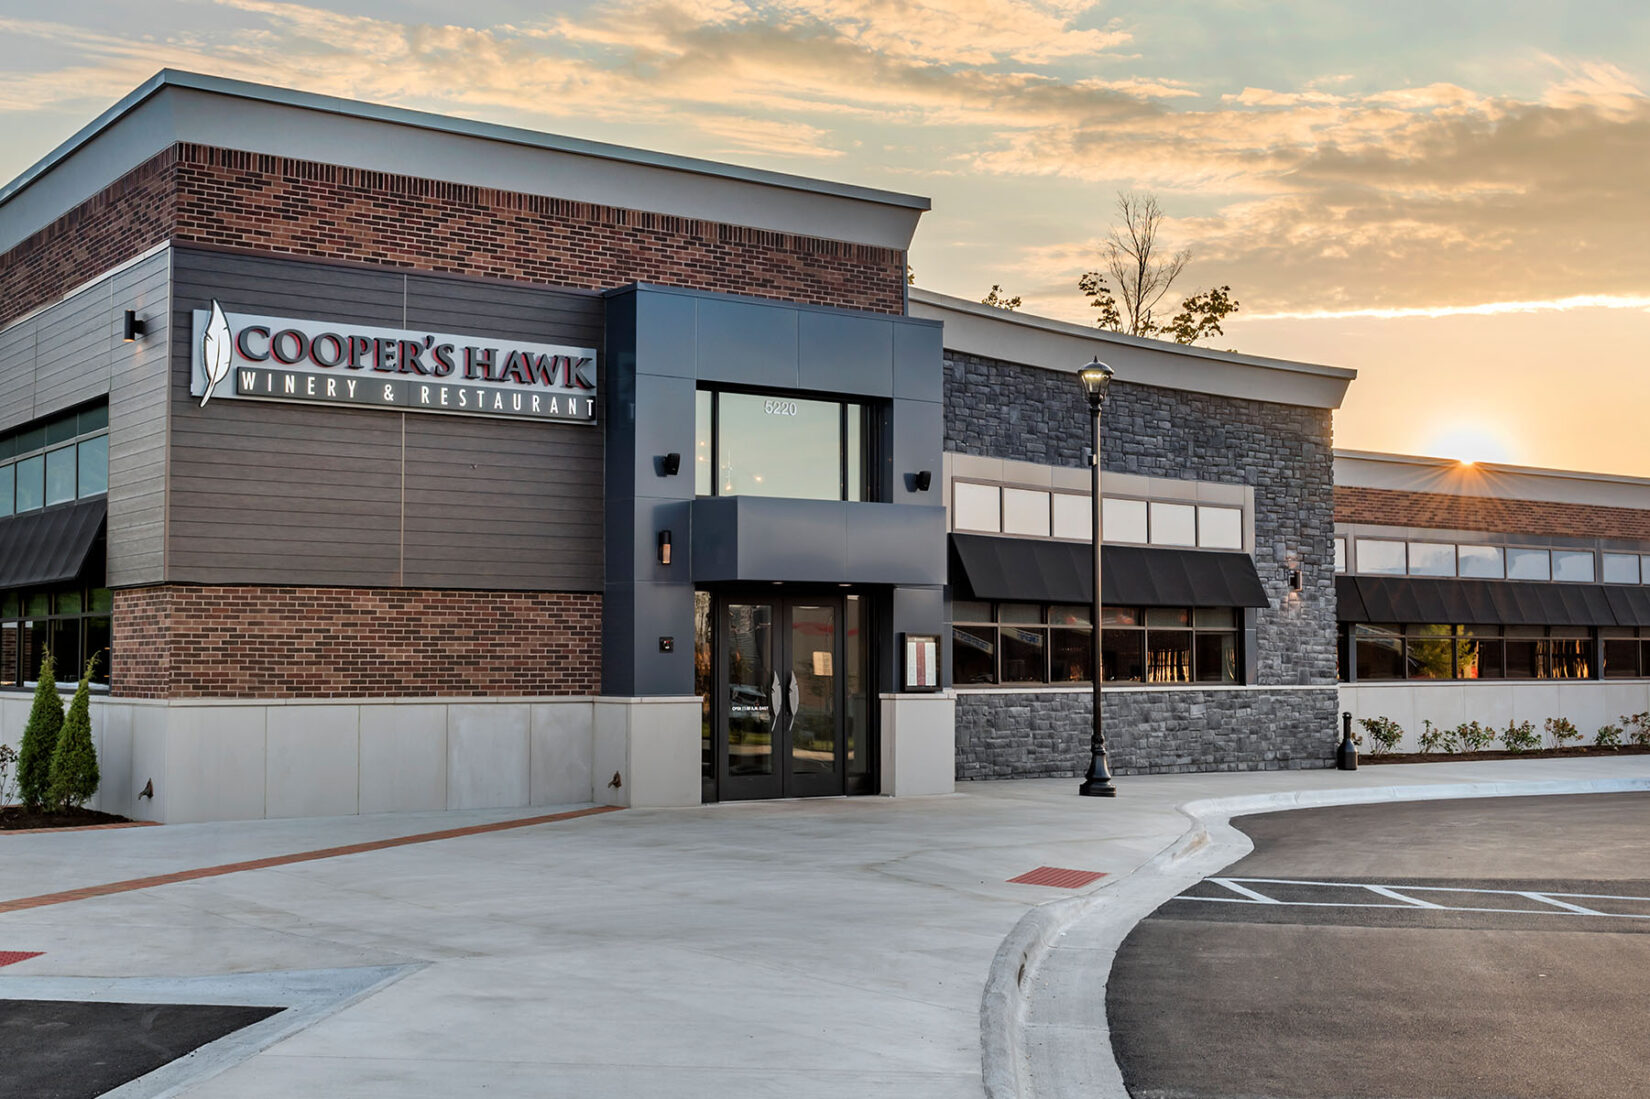 Exterior View of Cooper's Hawk in Centerville at Dusk